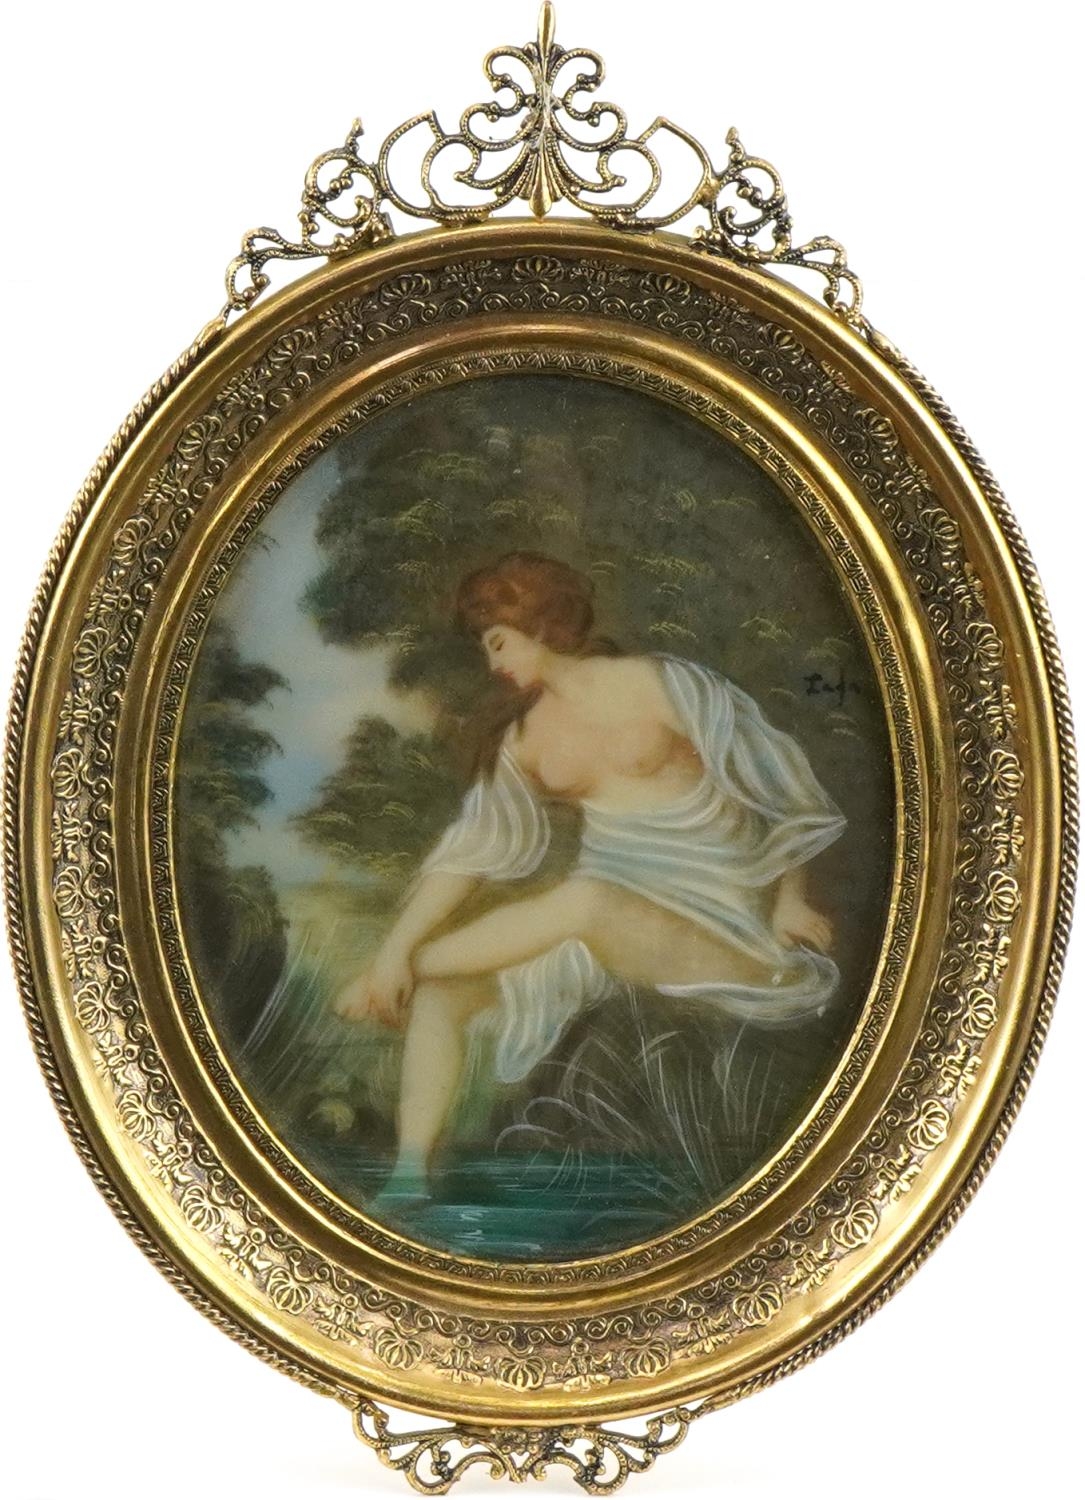 Oval Pre-Raphaelite style portrait miniature of a scantily dressed maiden, housed in an ornate brass - Image 2 of 3